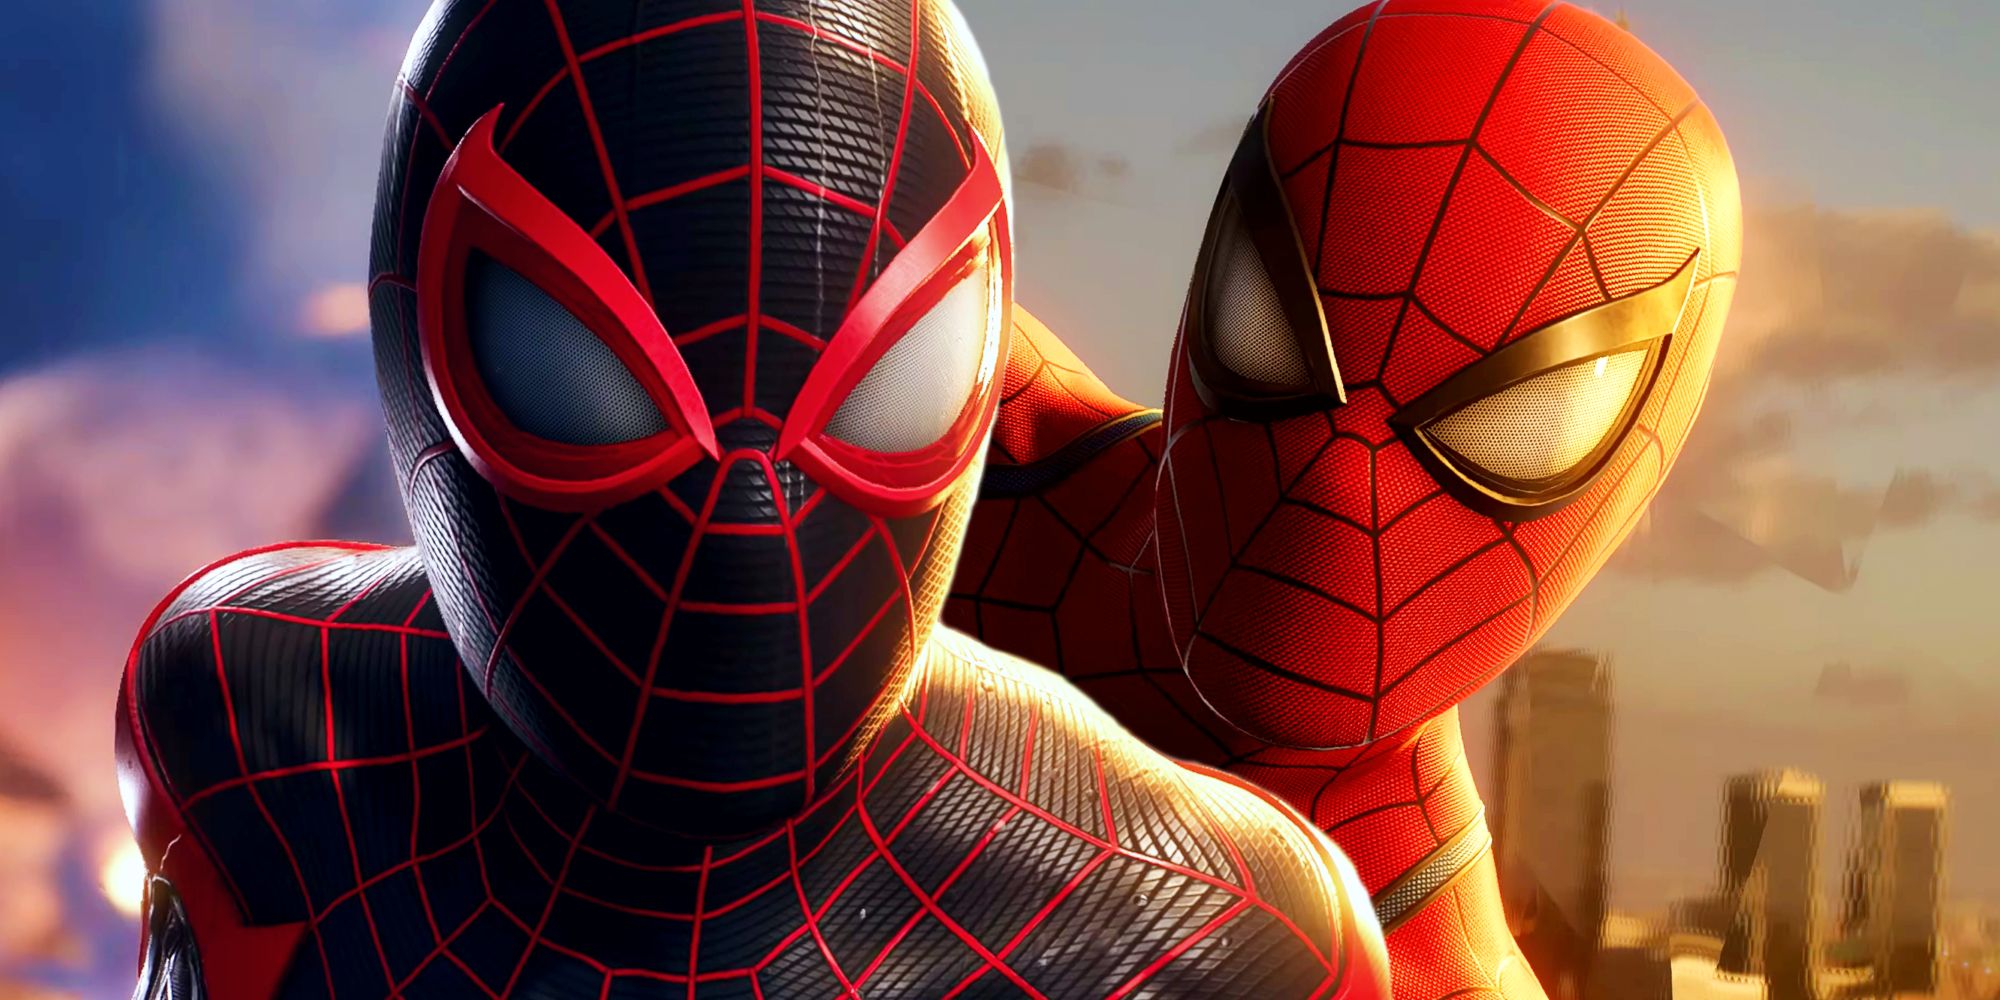 Two close-ups from Marvel's Spider-Man 2 edited together, one of Miles Morales and the other of Peter Parker, both in their Spider-Man suits. The one of Peter is behind the one of Miles so it looks like the former is looking over the latter's shoulder.